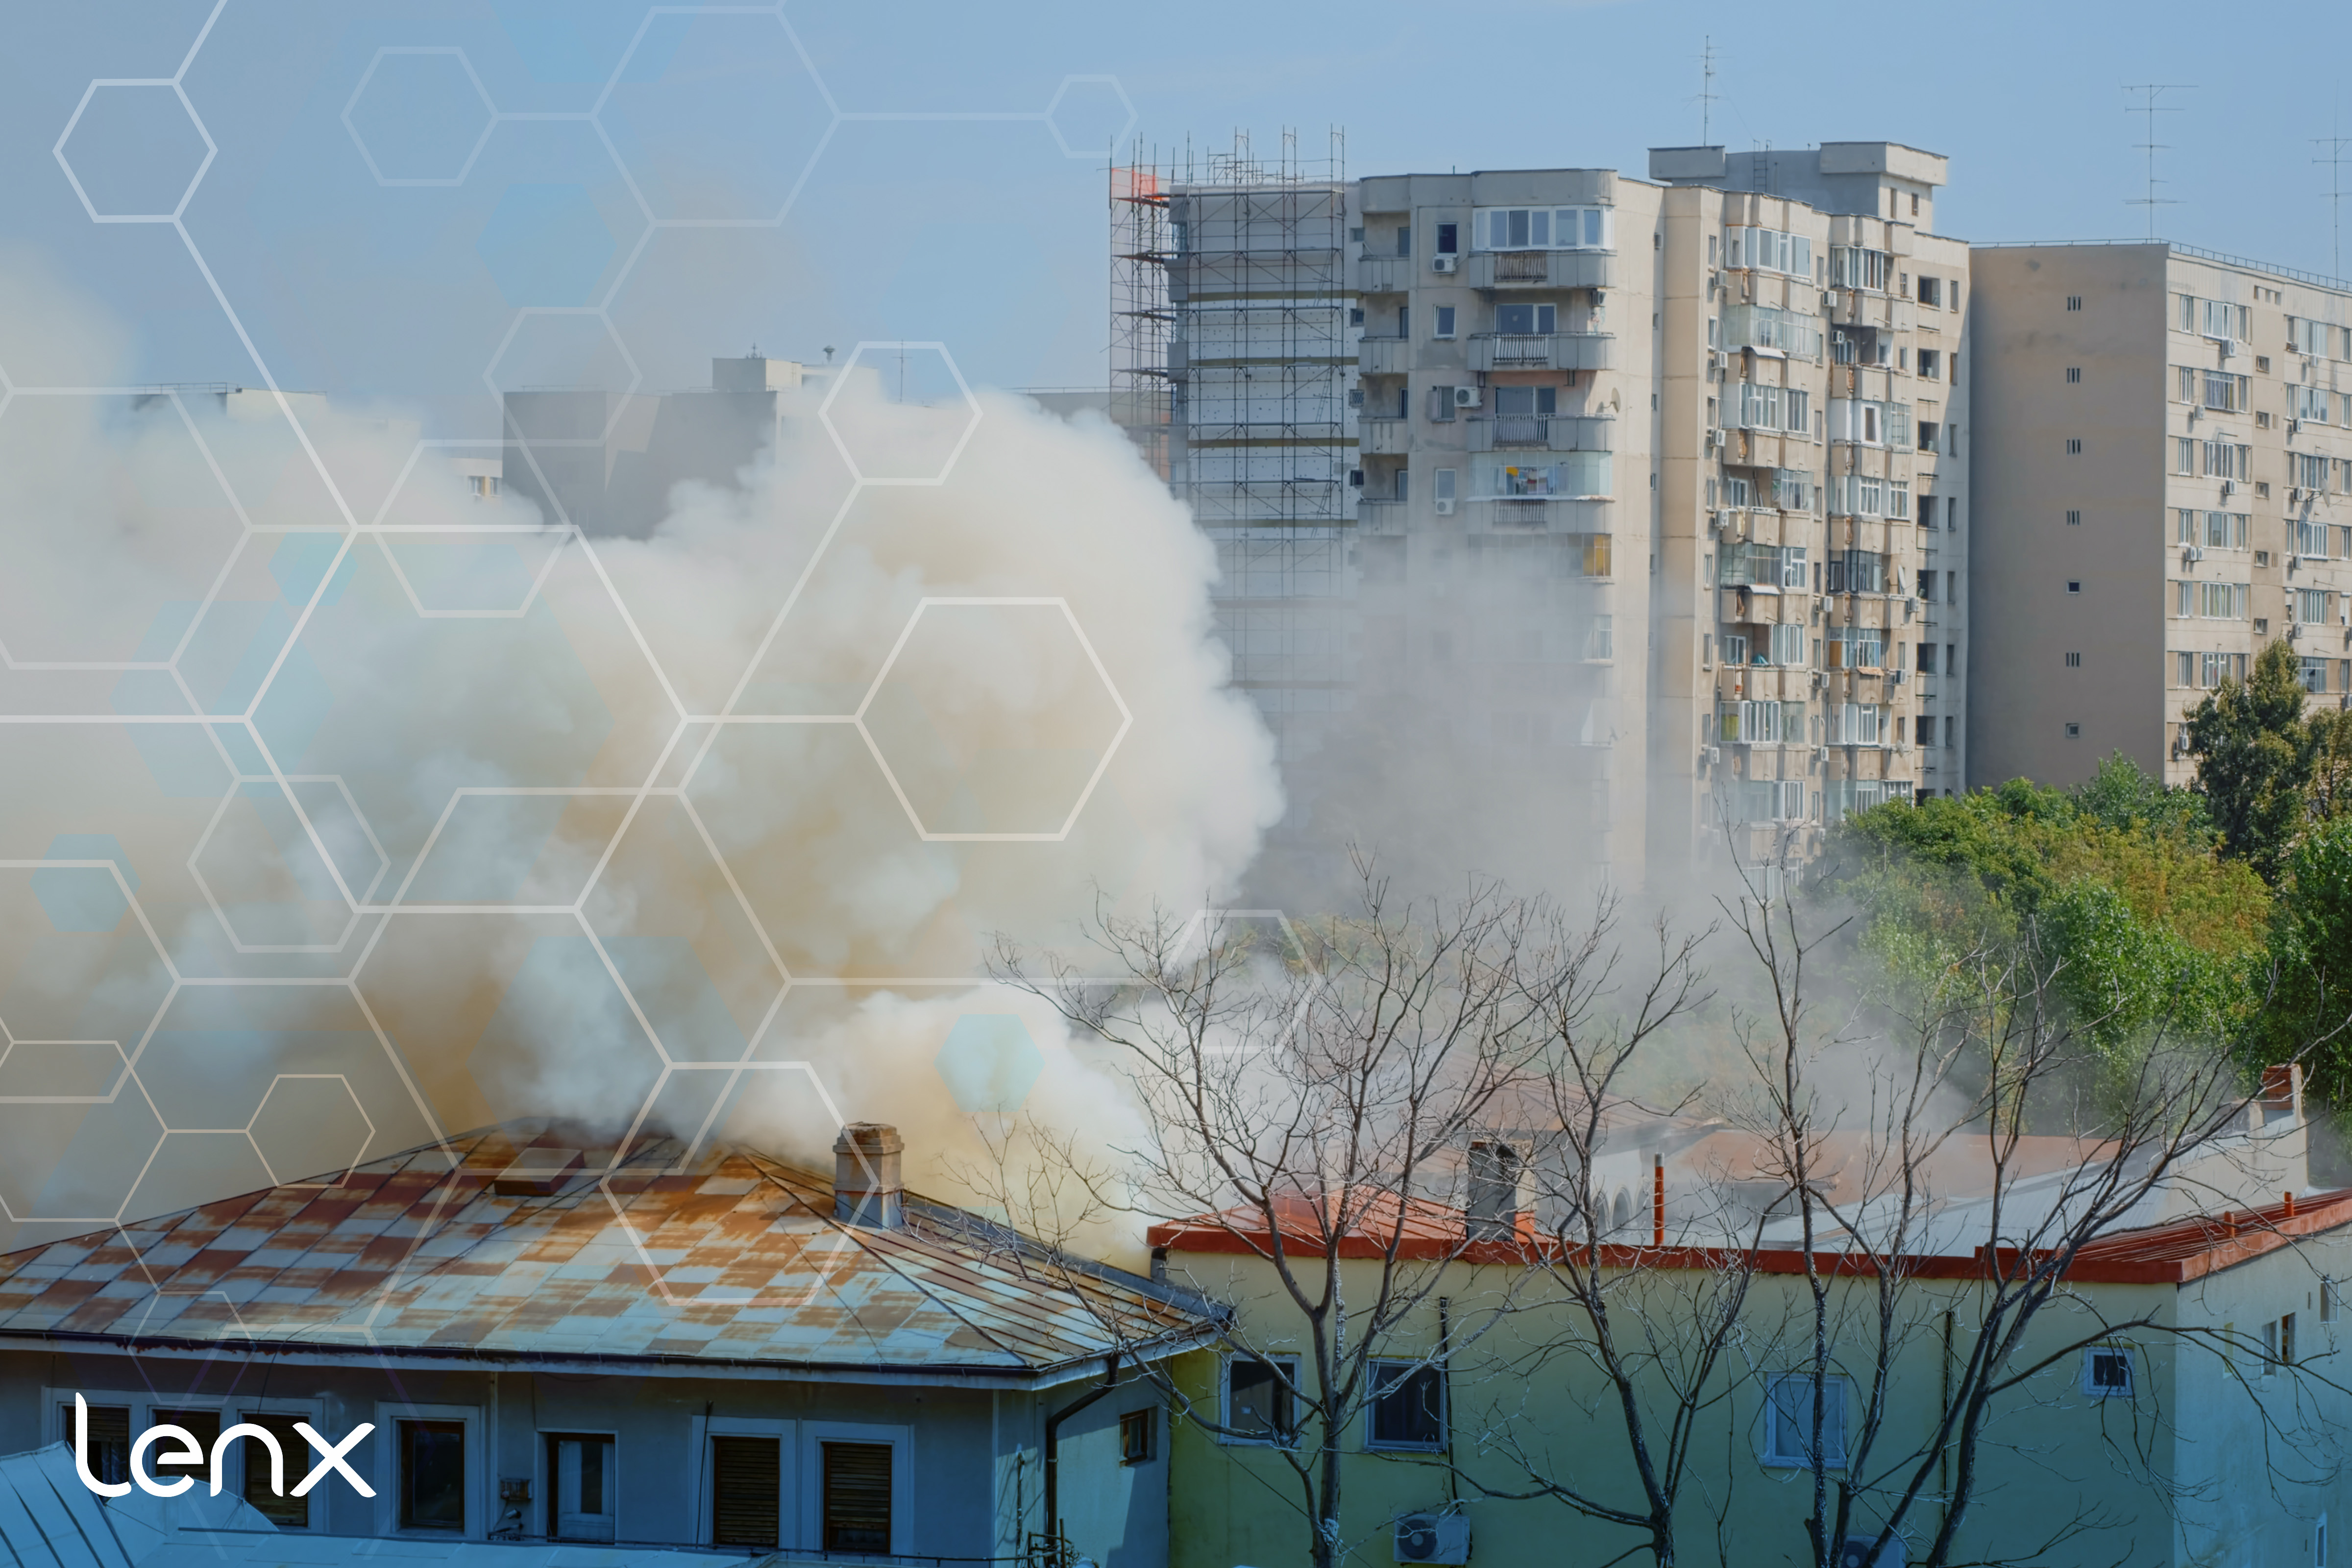 Using AI Security, Active Shooter Detection Systems to Detect Smoke